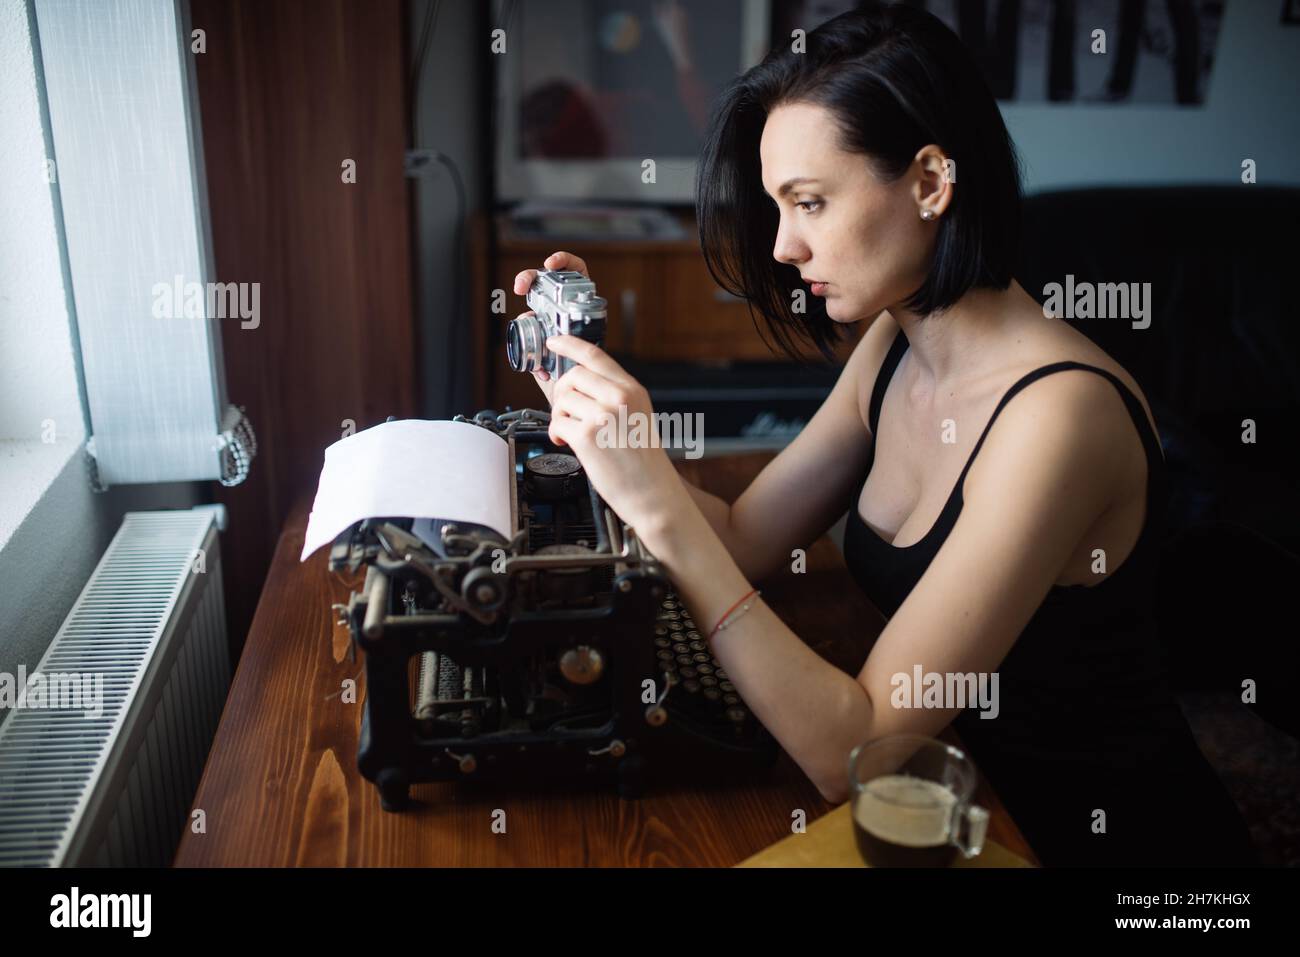 Beautiful woman taking a film photo at home. Stock Photo